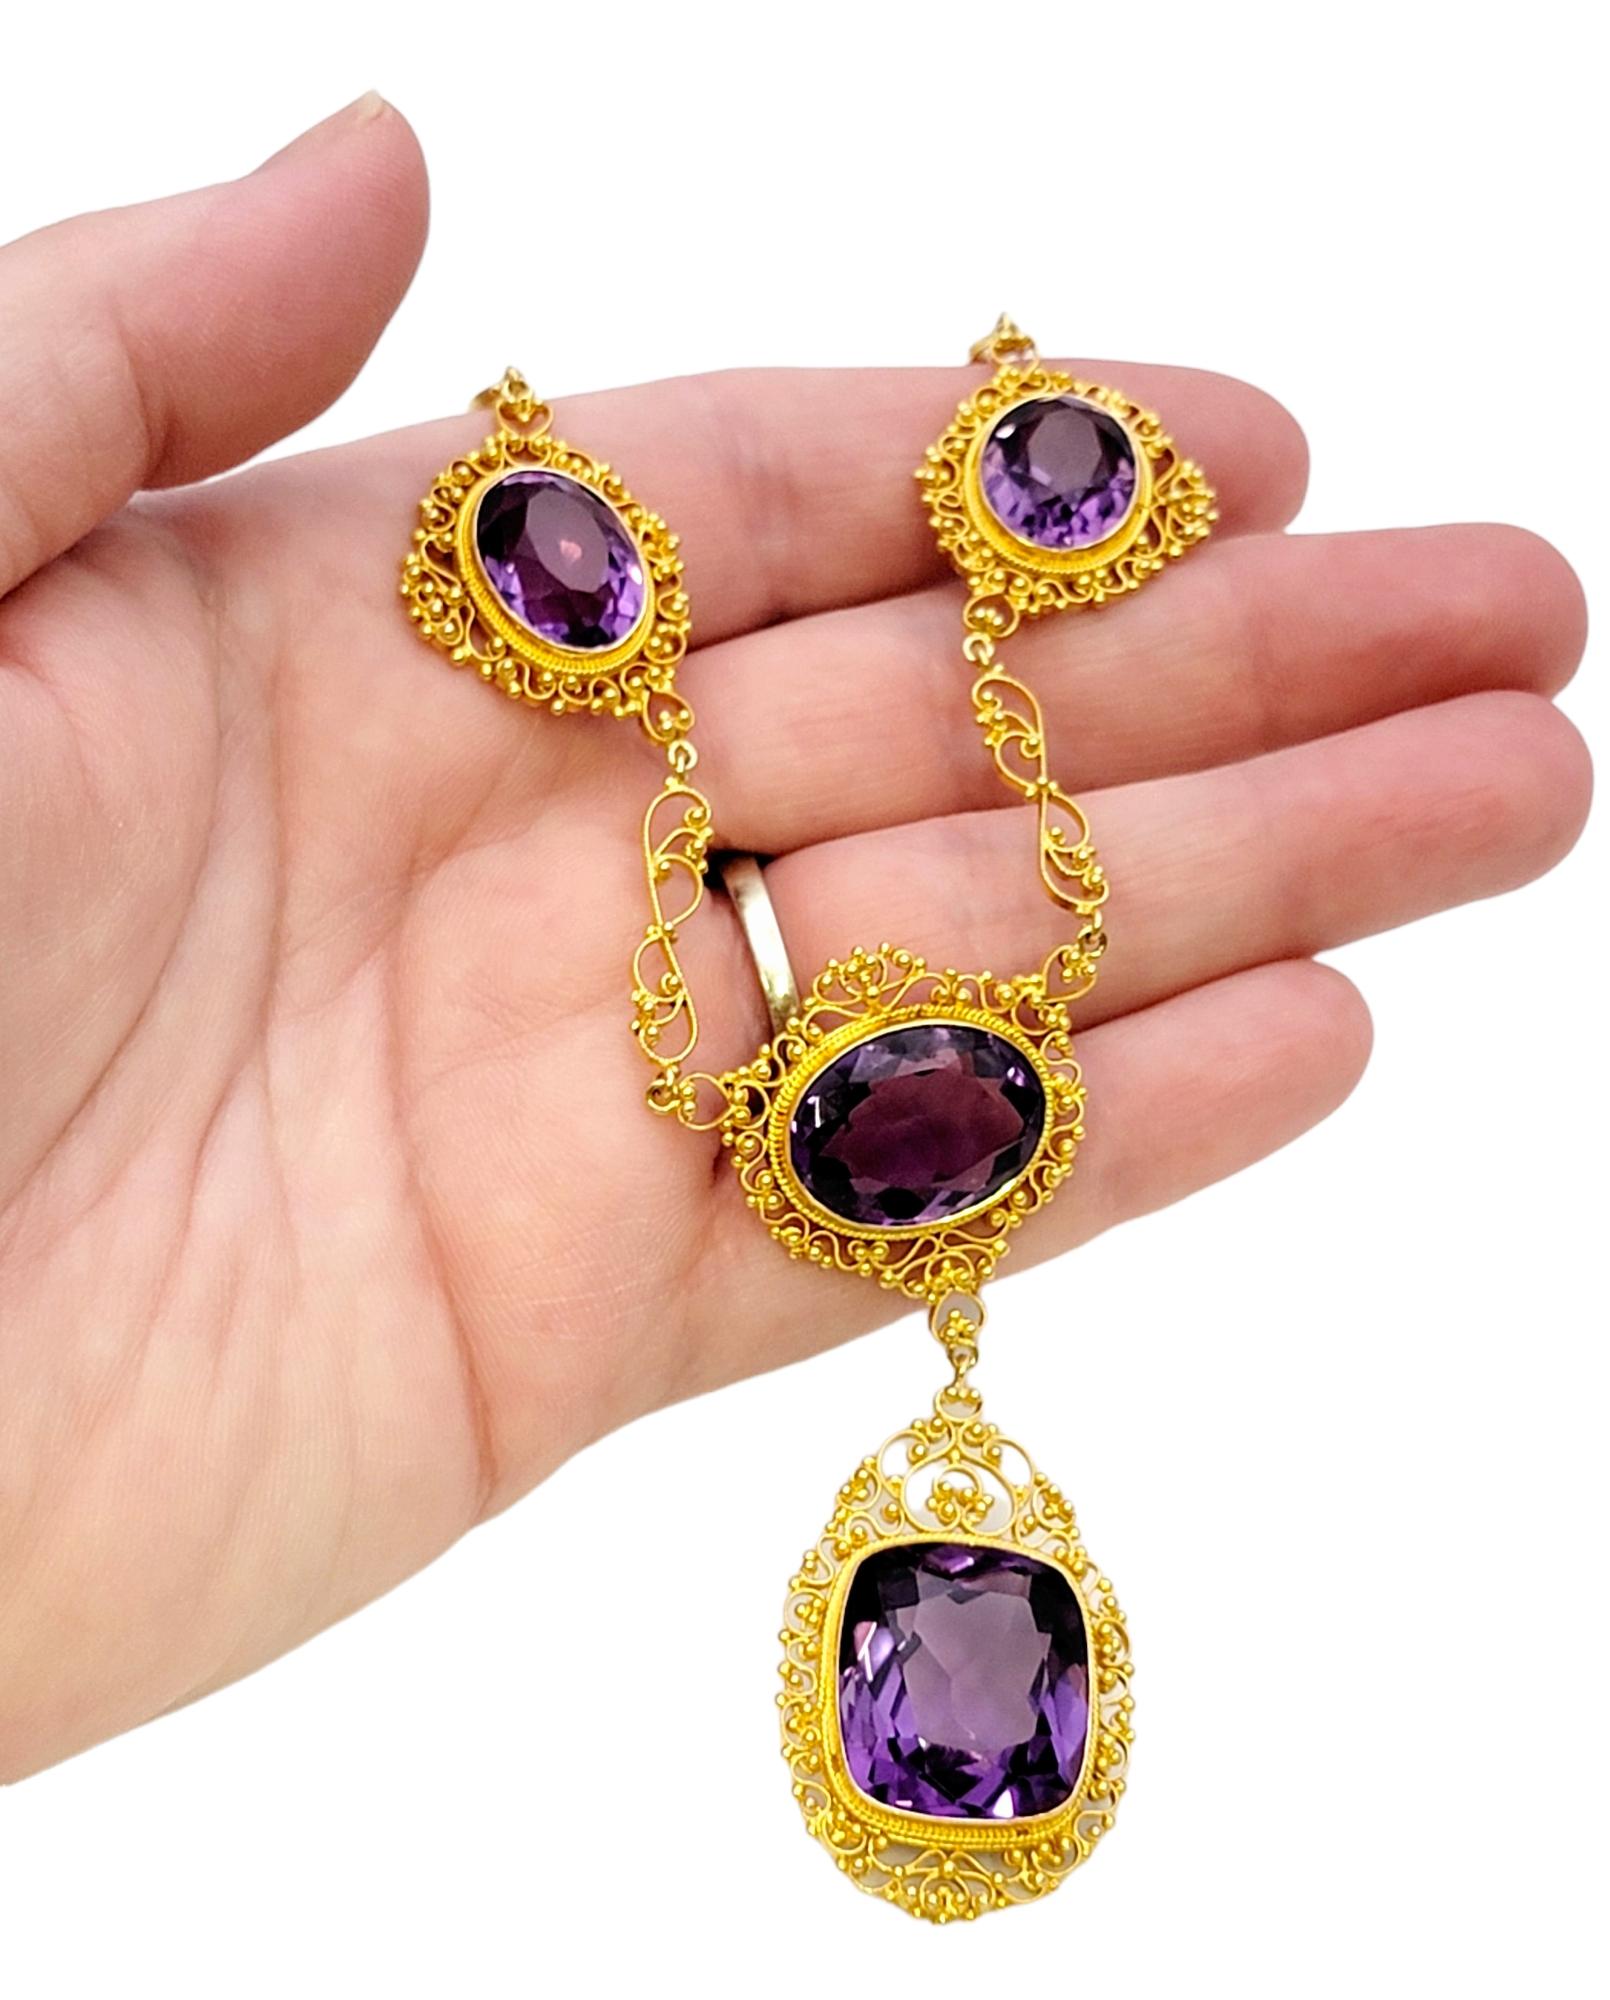 48.48 Carat Cushion and Oval Cut Amethyst Station Drop Necklace in 21 Karat Gold 1